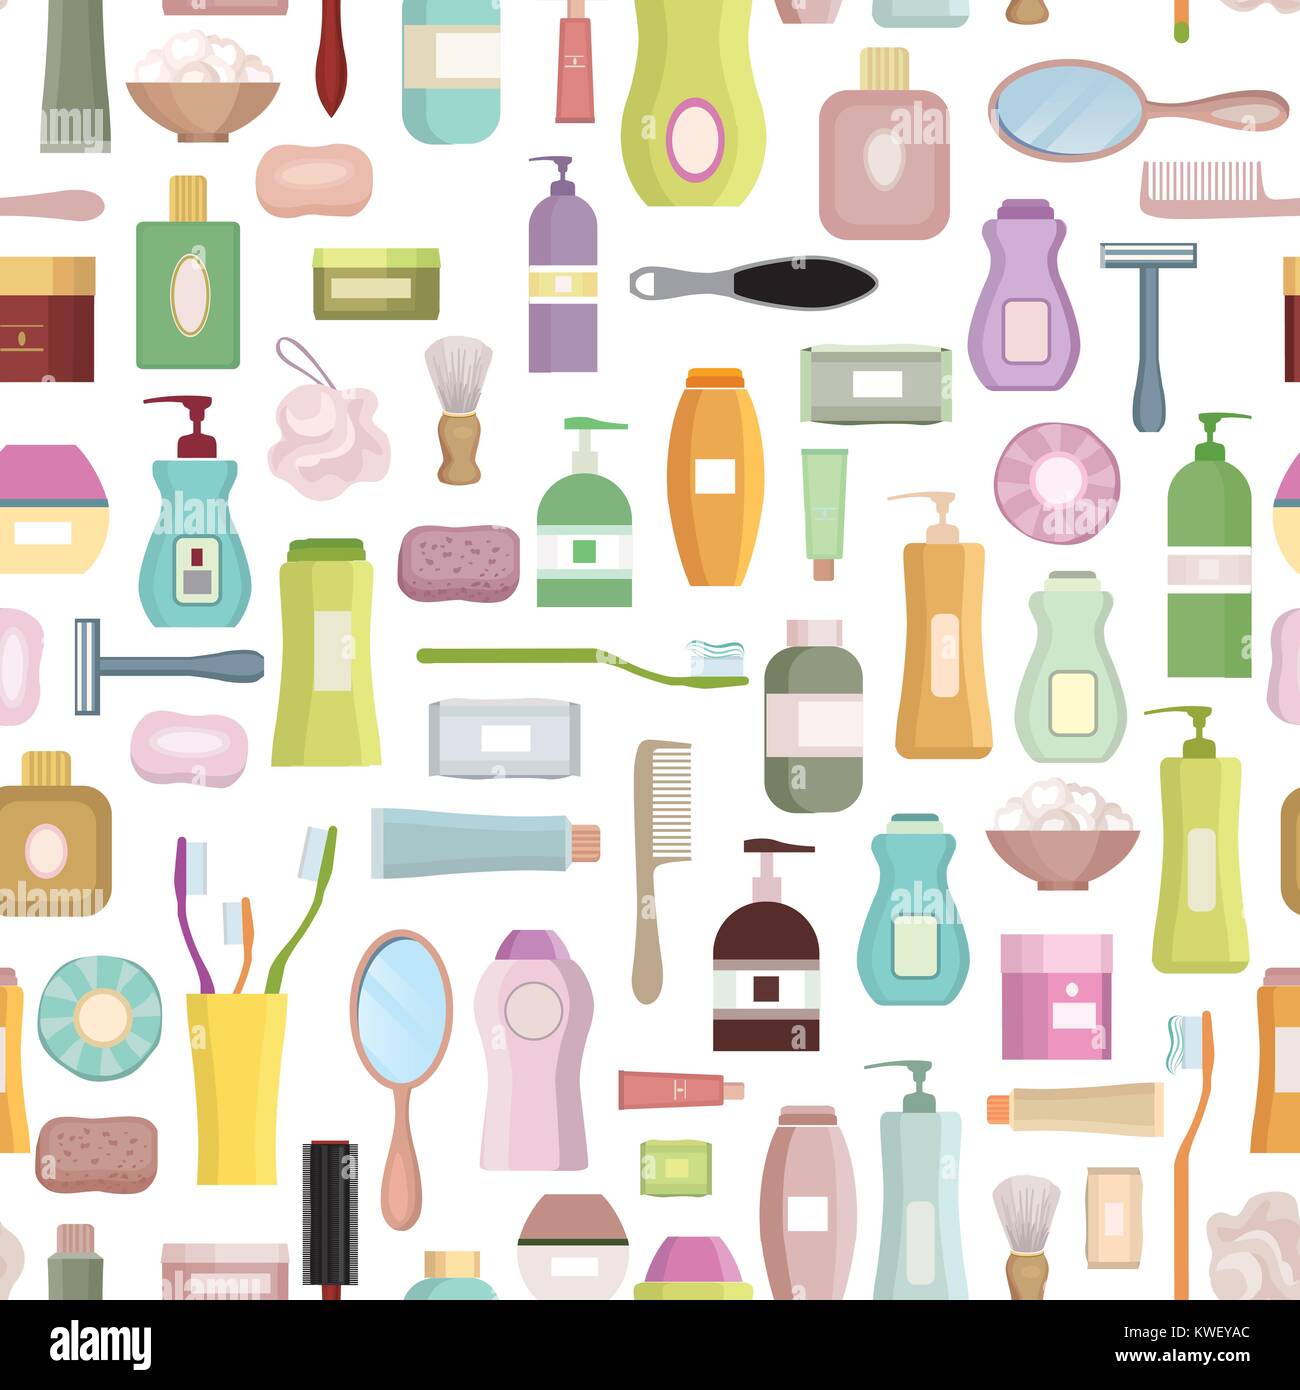 Beauty care related set background. Hygiene symbol seamless pattern. Bath supplies, shower, tooth care, brushes, towel and razors. Stock Vector